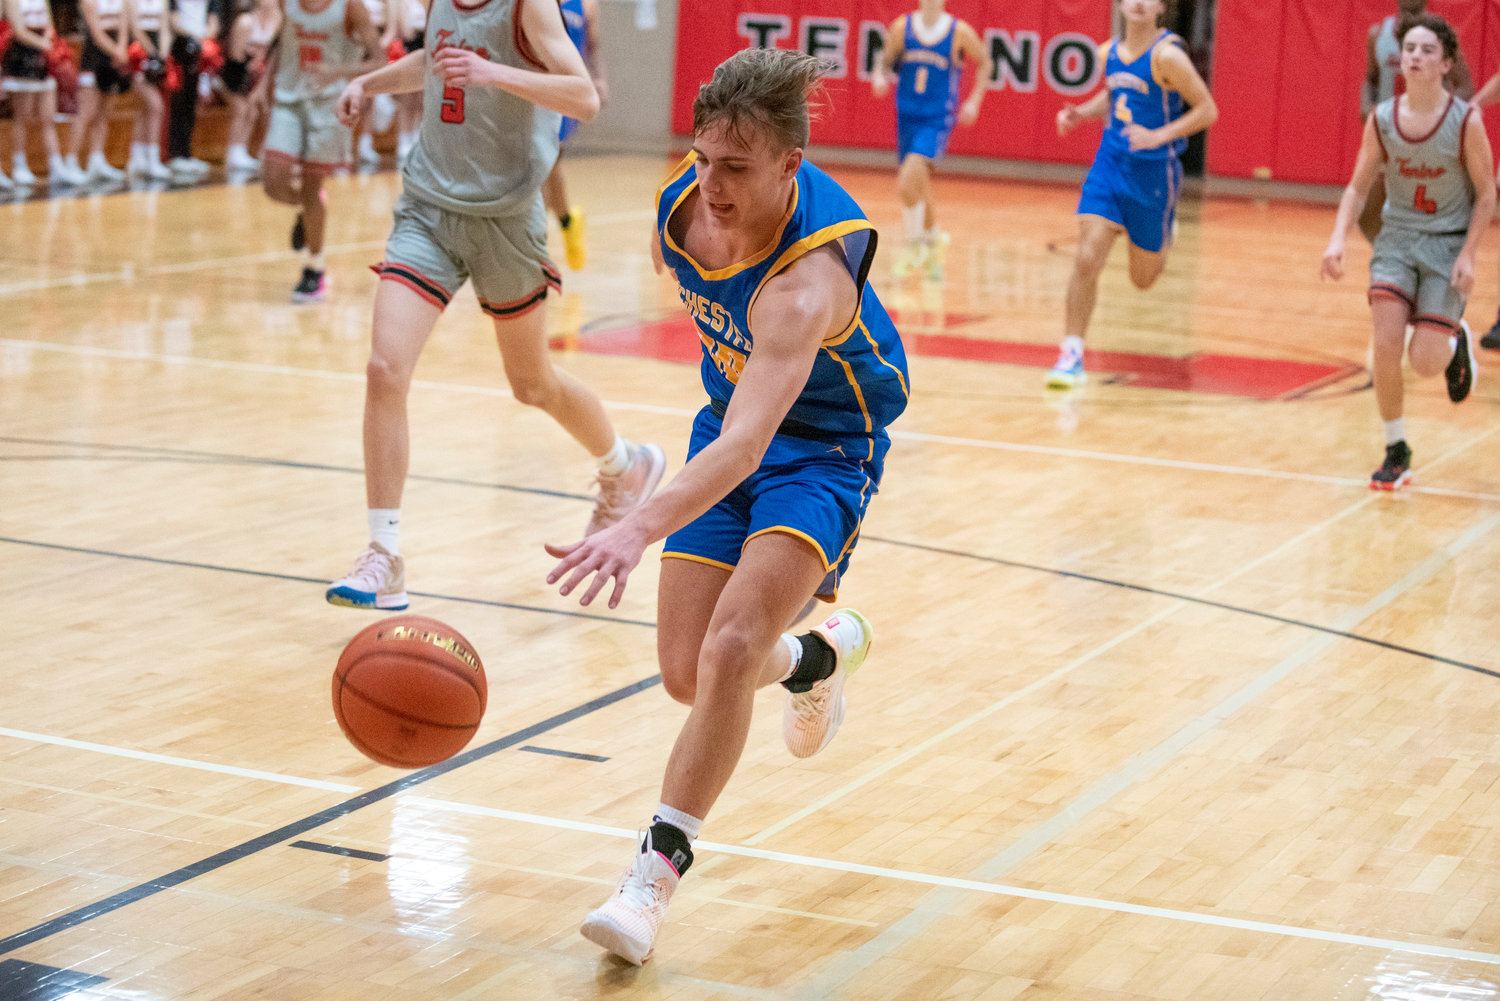 Rochester's Jyson O'Connor chases down a loose ball against Tenino on Nov. 29.